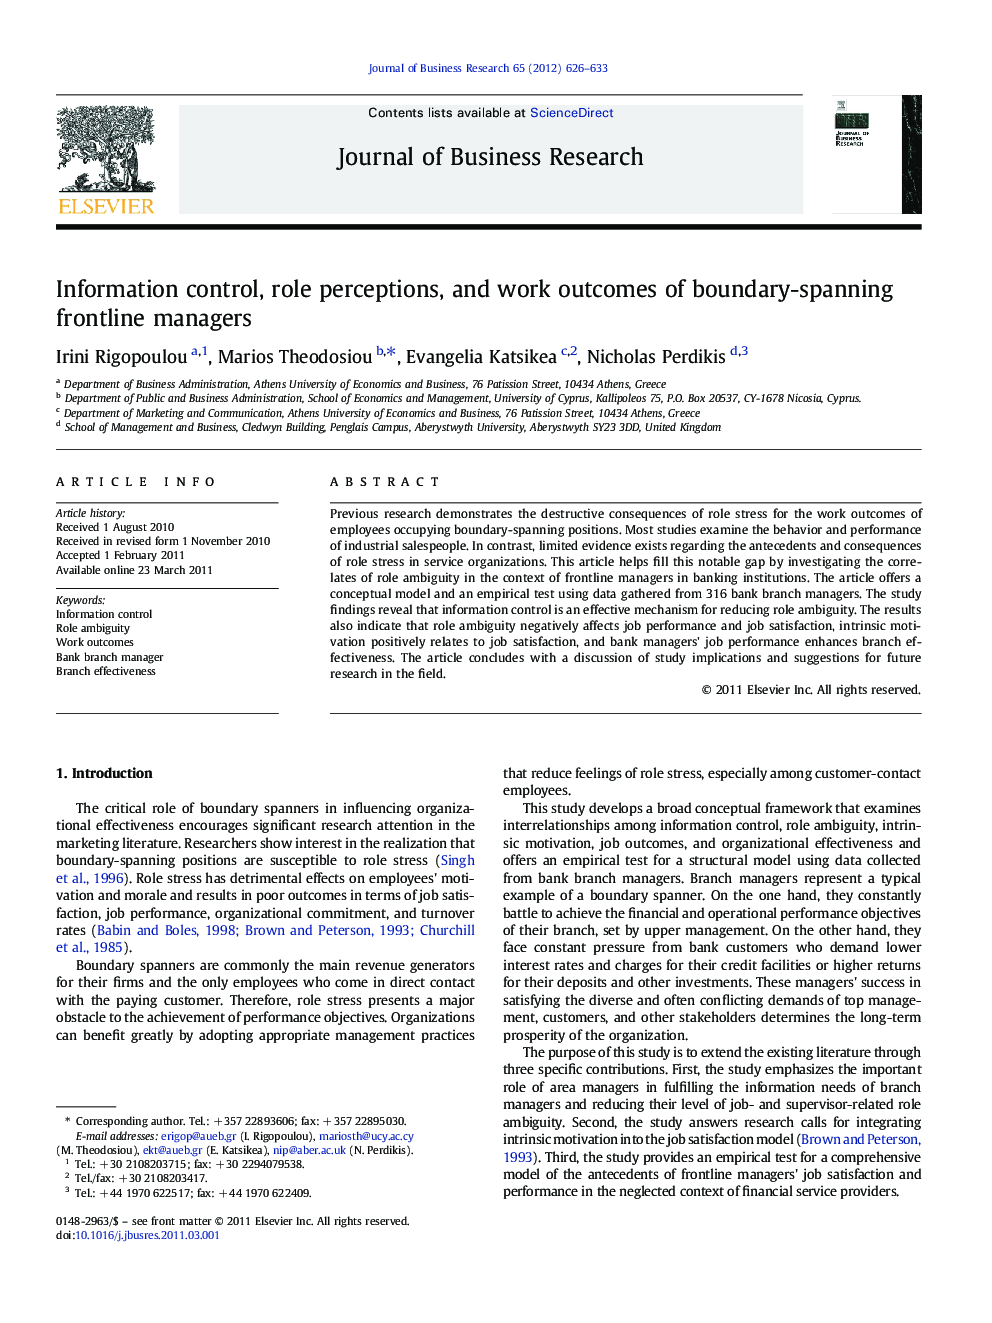 Information control, role perceptions, and work outcomes of boundary-spanning frontline managers